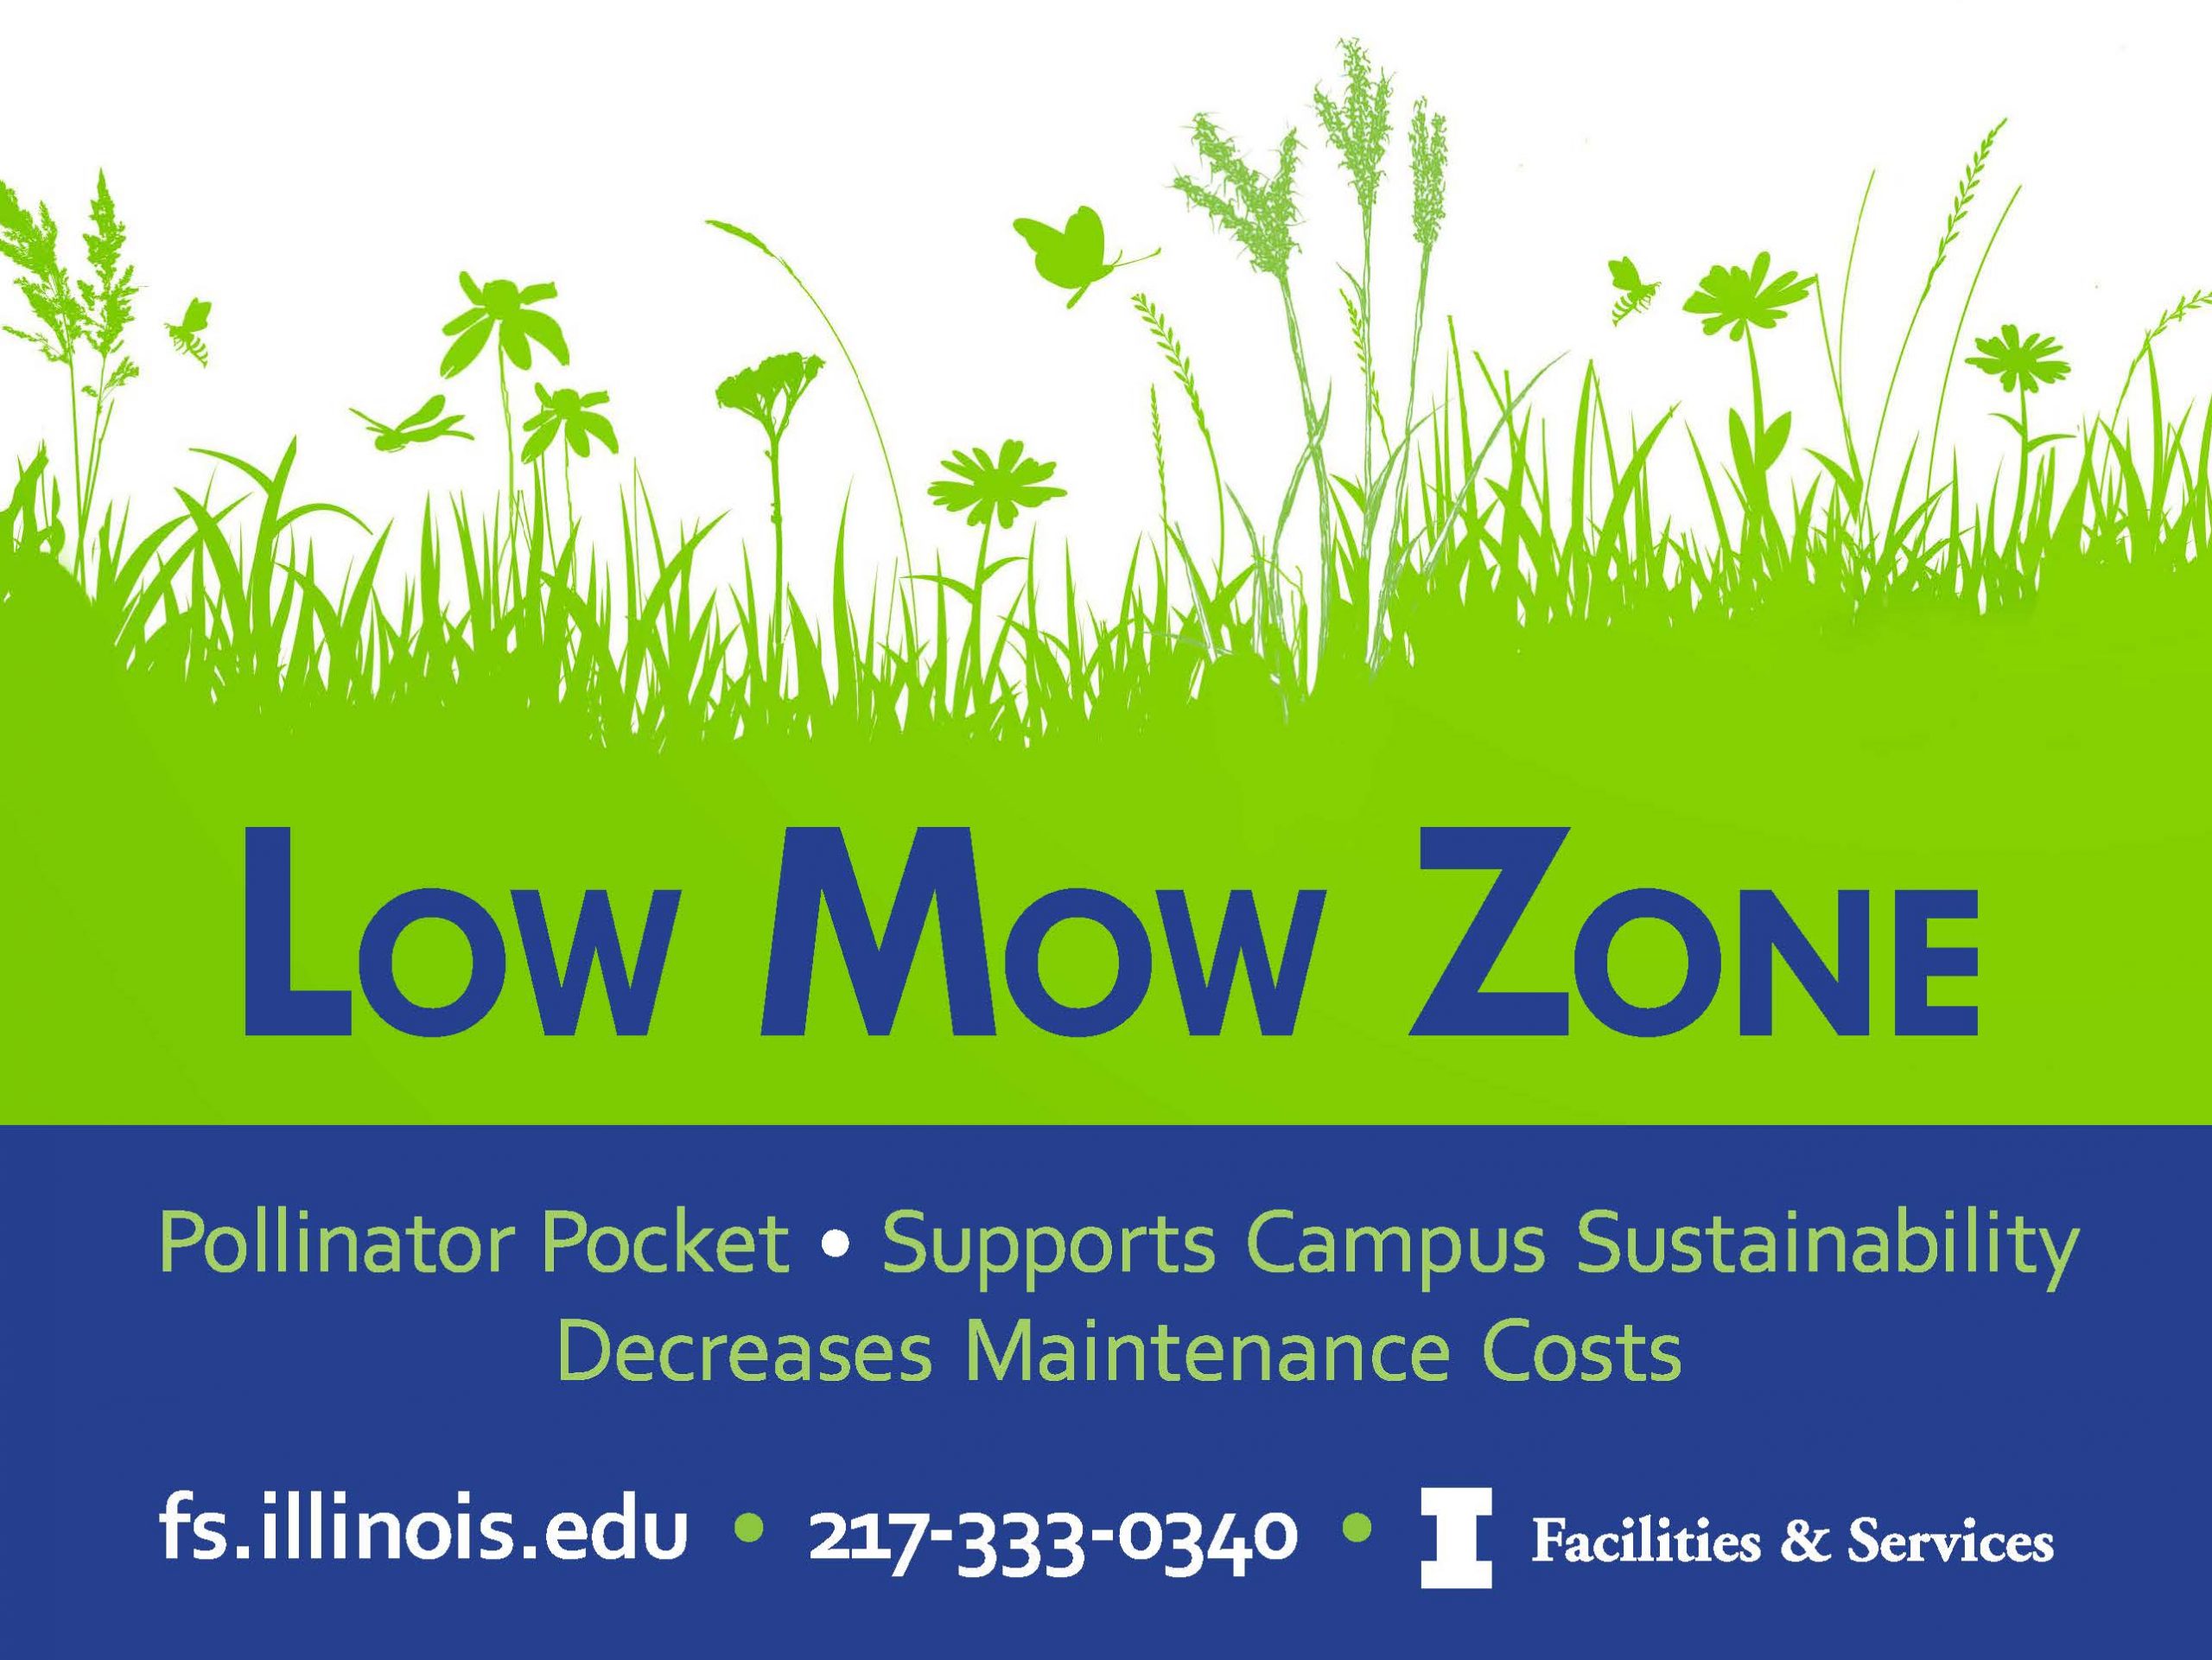 Campus Low Mow Signage - Pollinator Pocket/Supports Campus Sustainability/Decreases Maintenance Costs